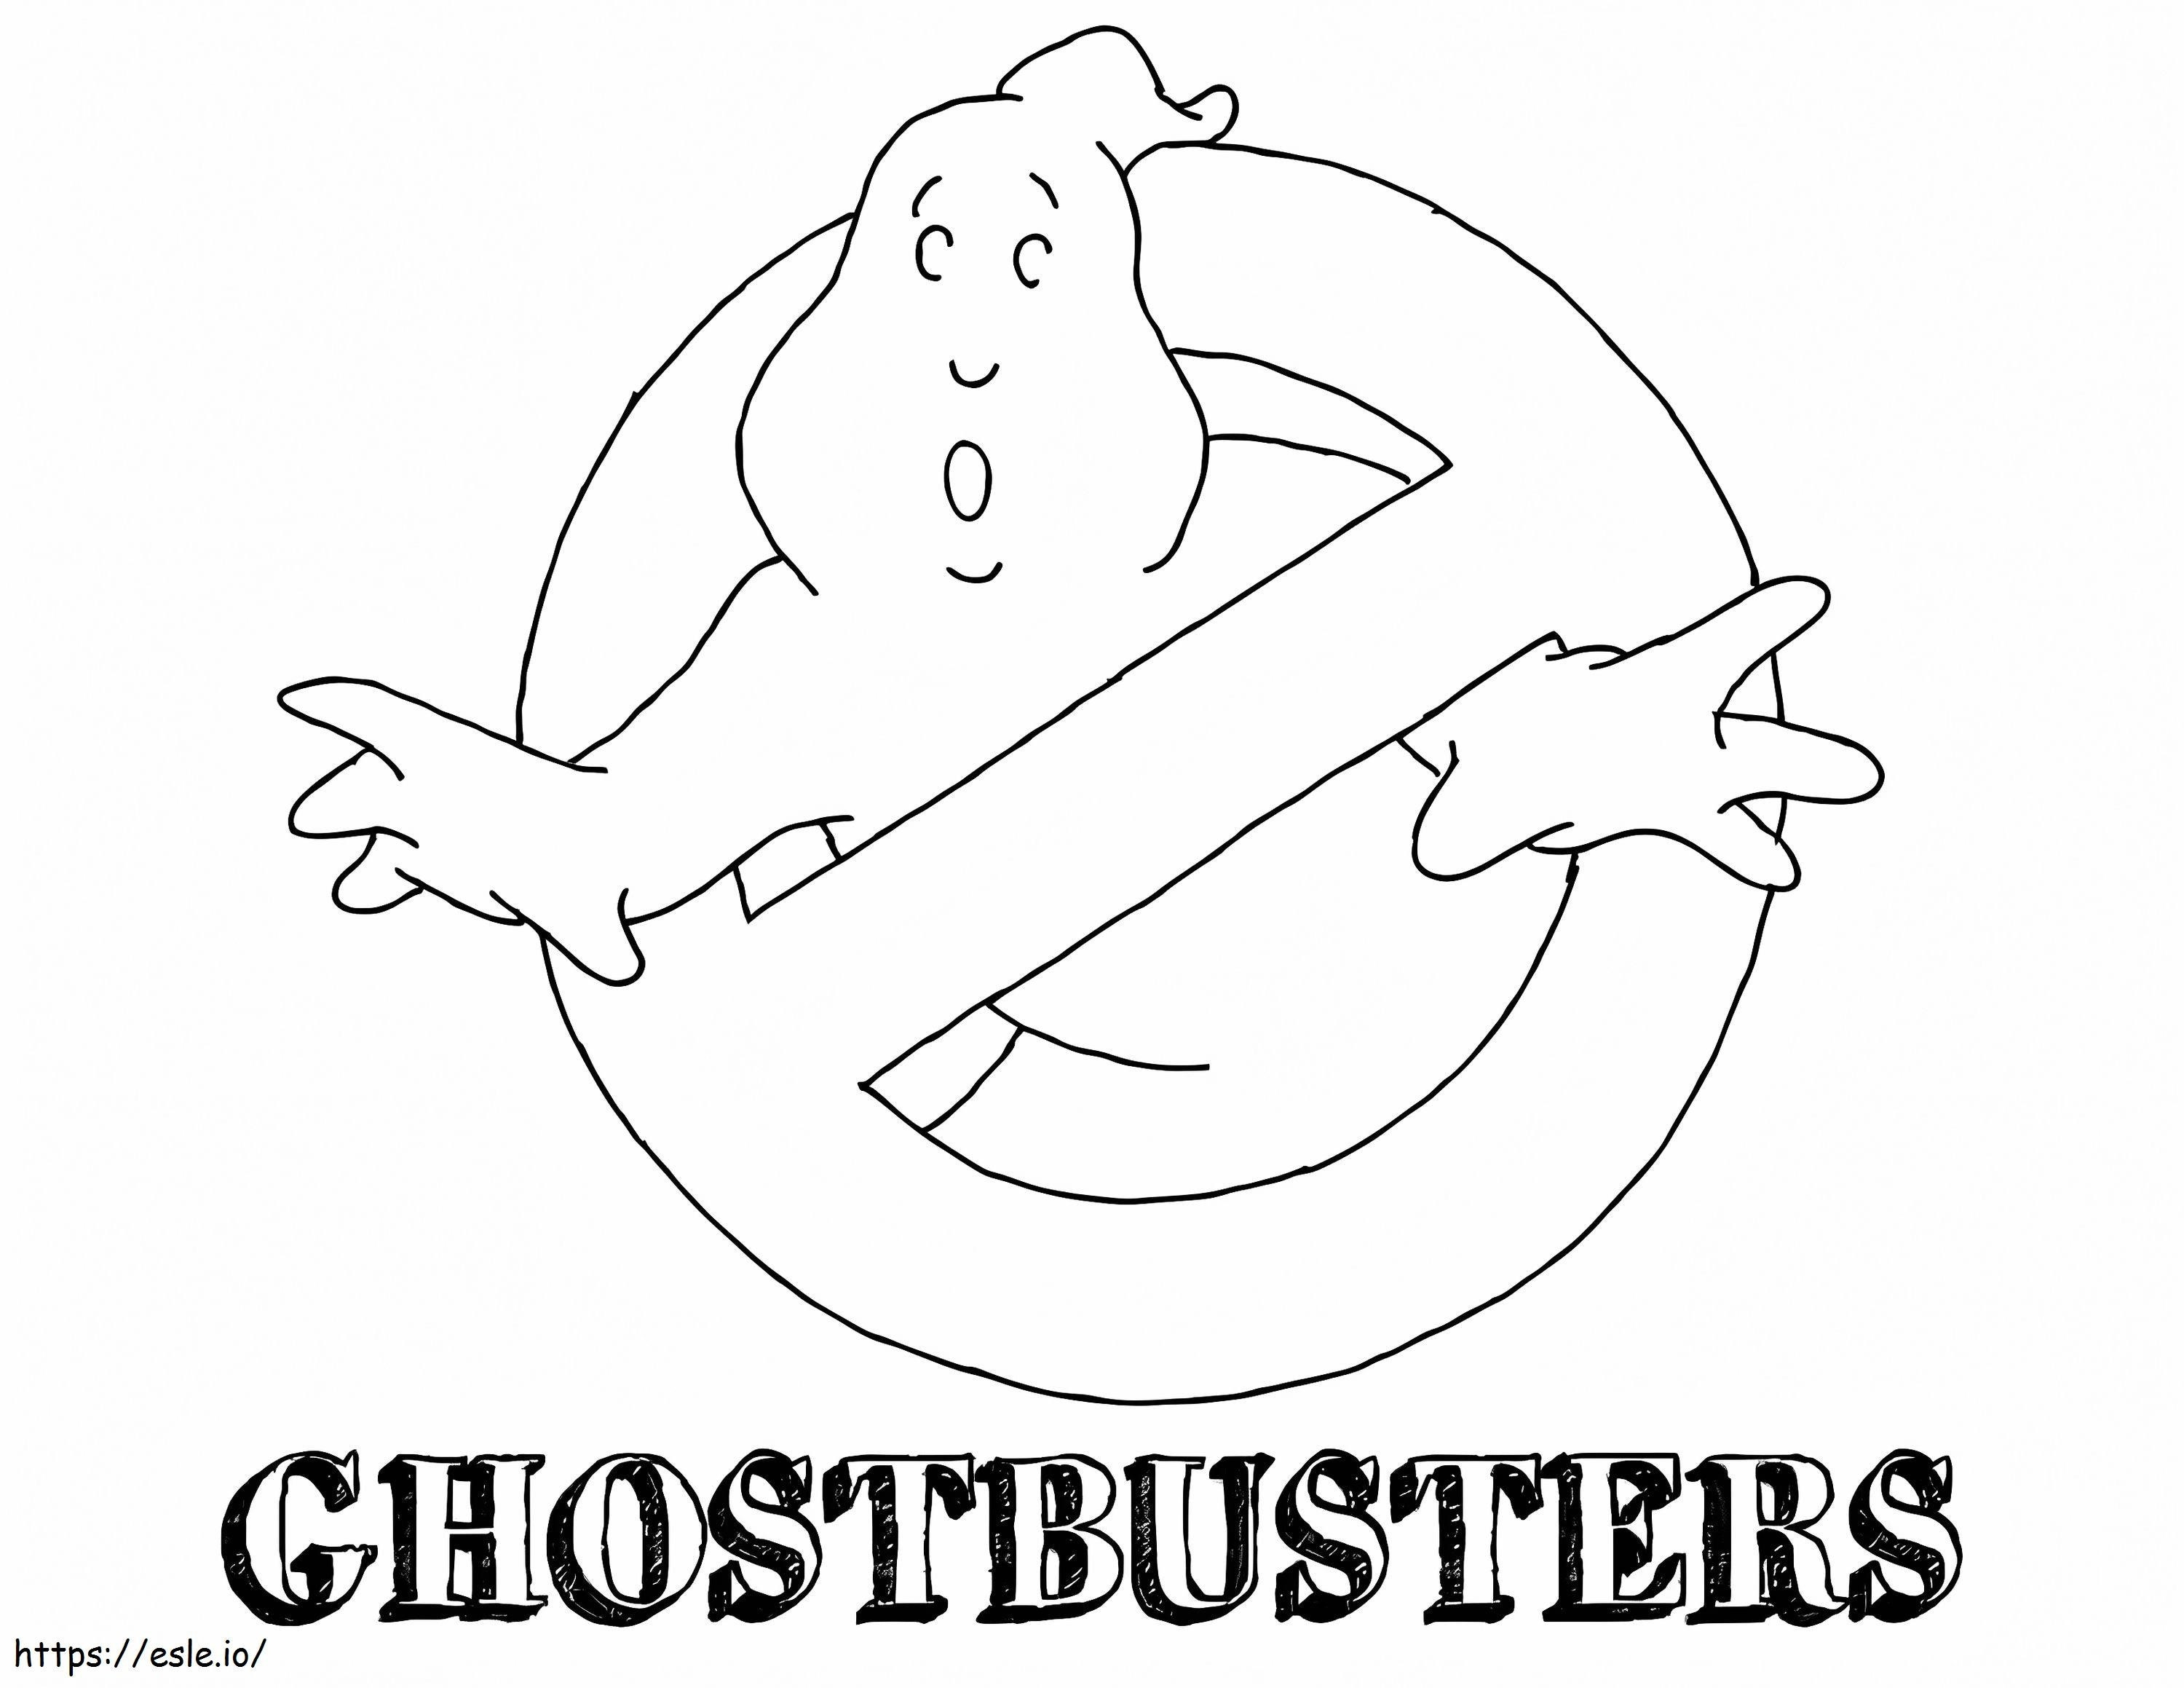 Ghostbusters Logo Drawing coloring page